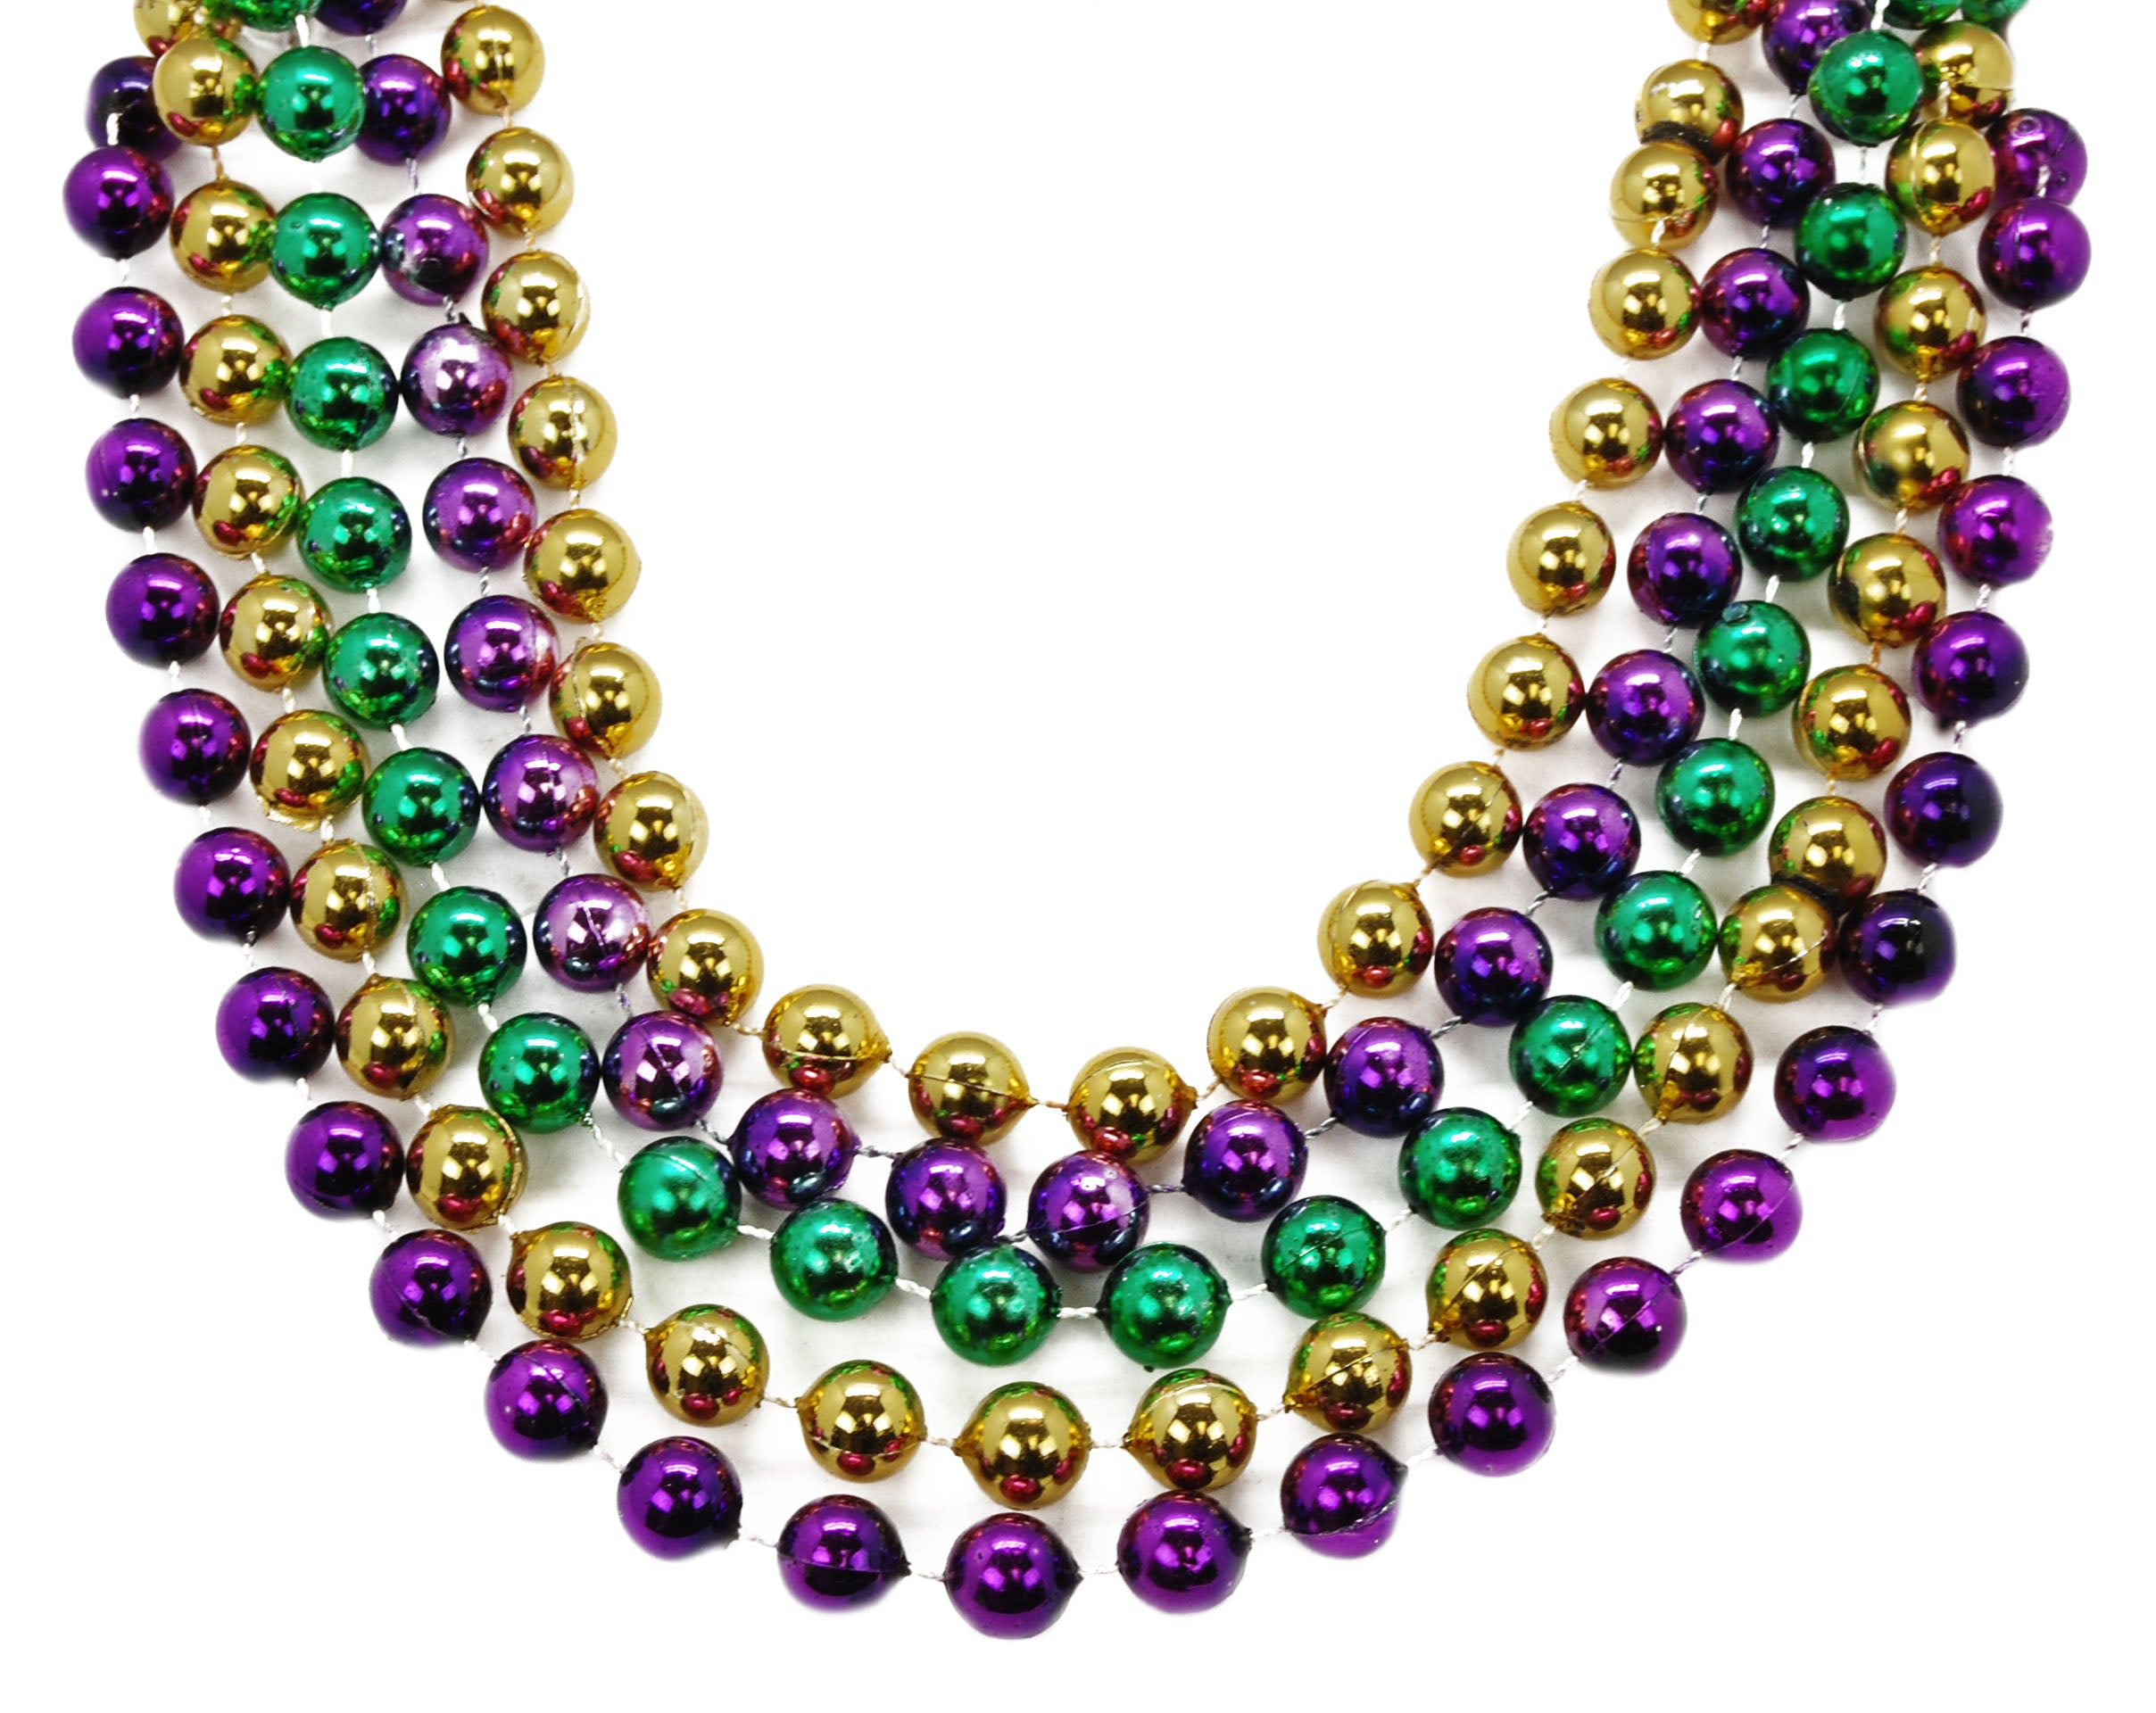 48" 14mm Round Beads Purple, Green, and Gold